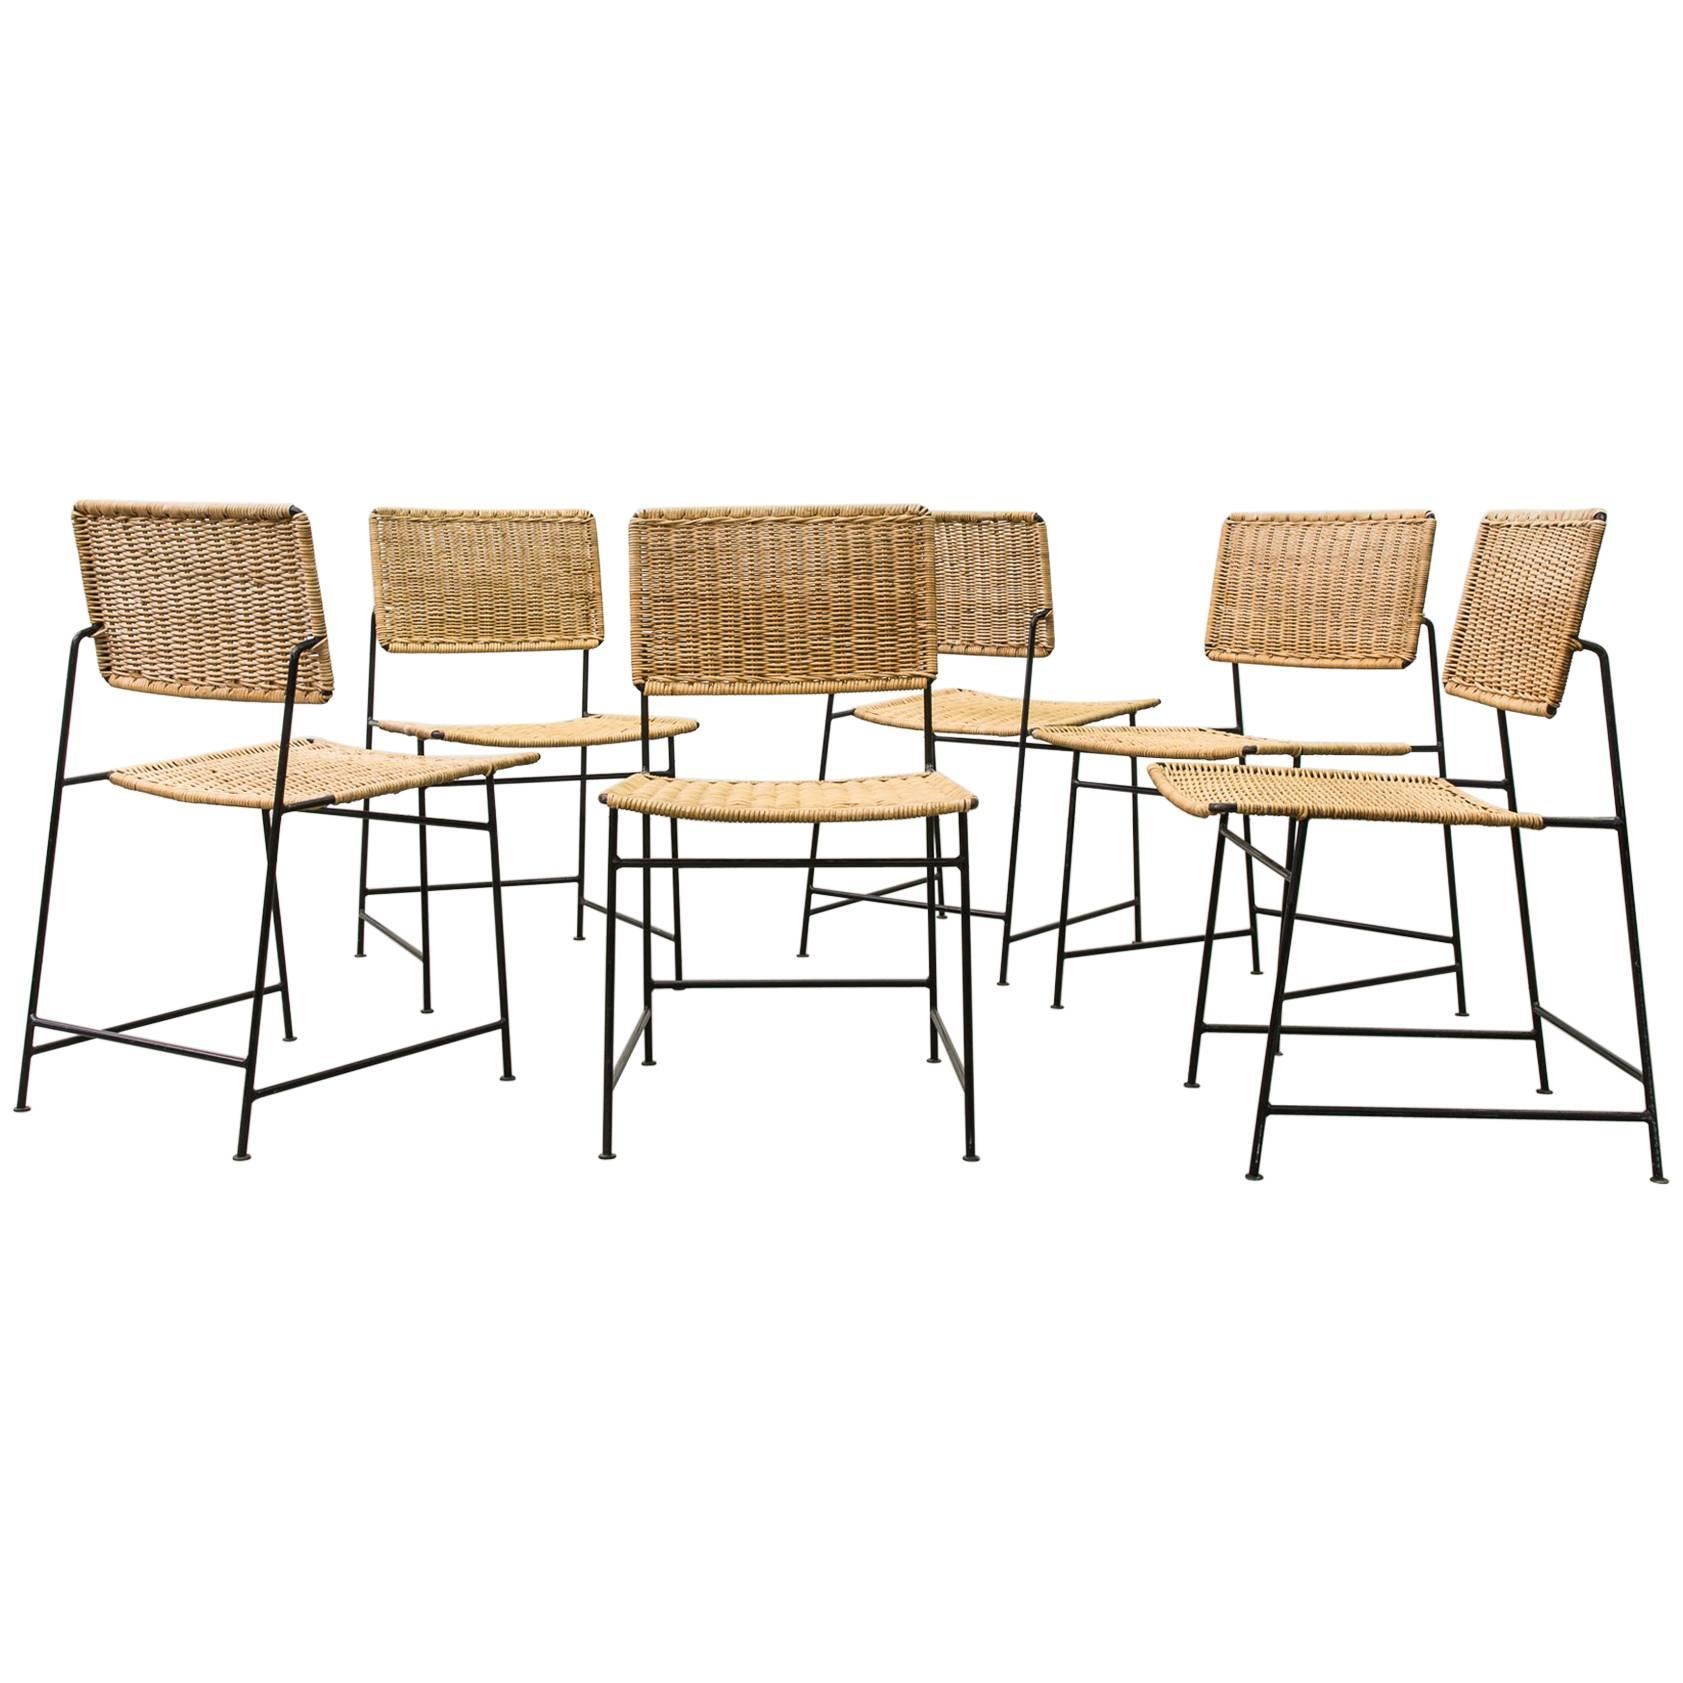 Set of 8 Herta-Maria Witzemann Rattan and Wire Dining Chairs